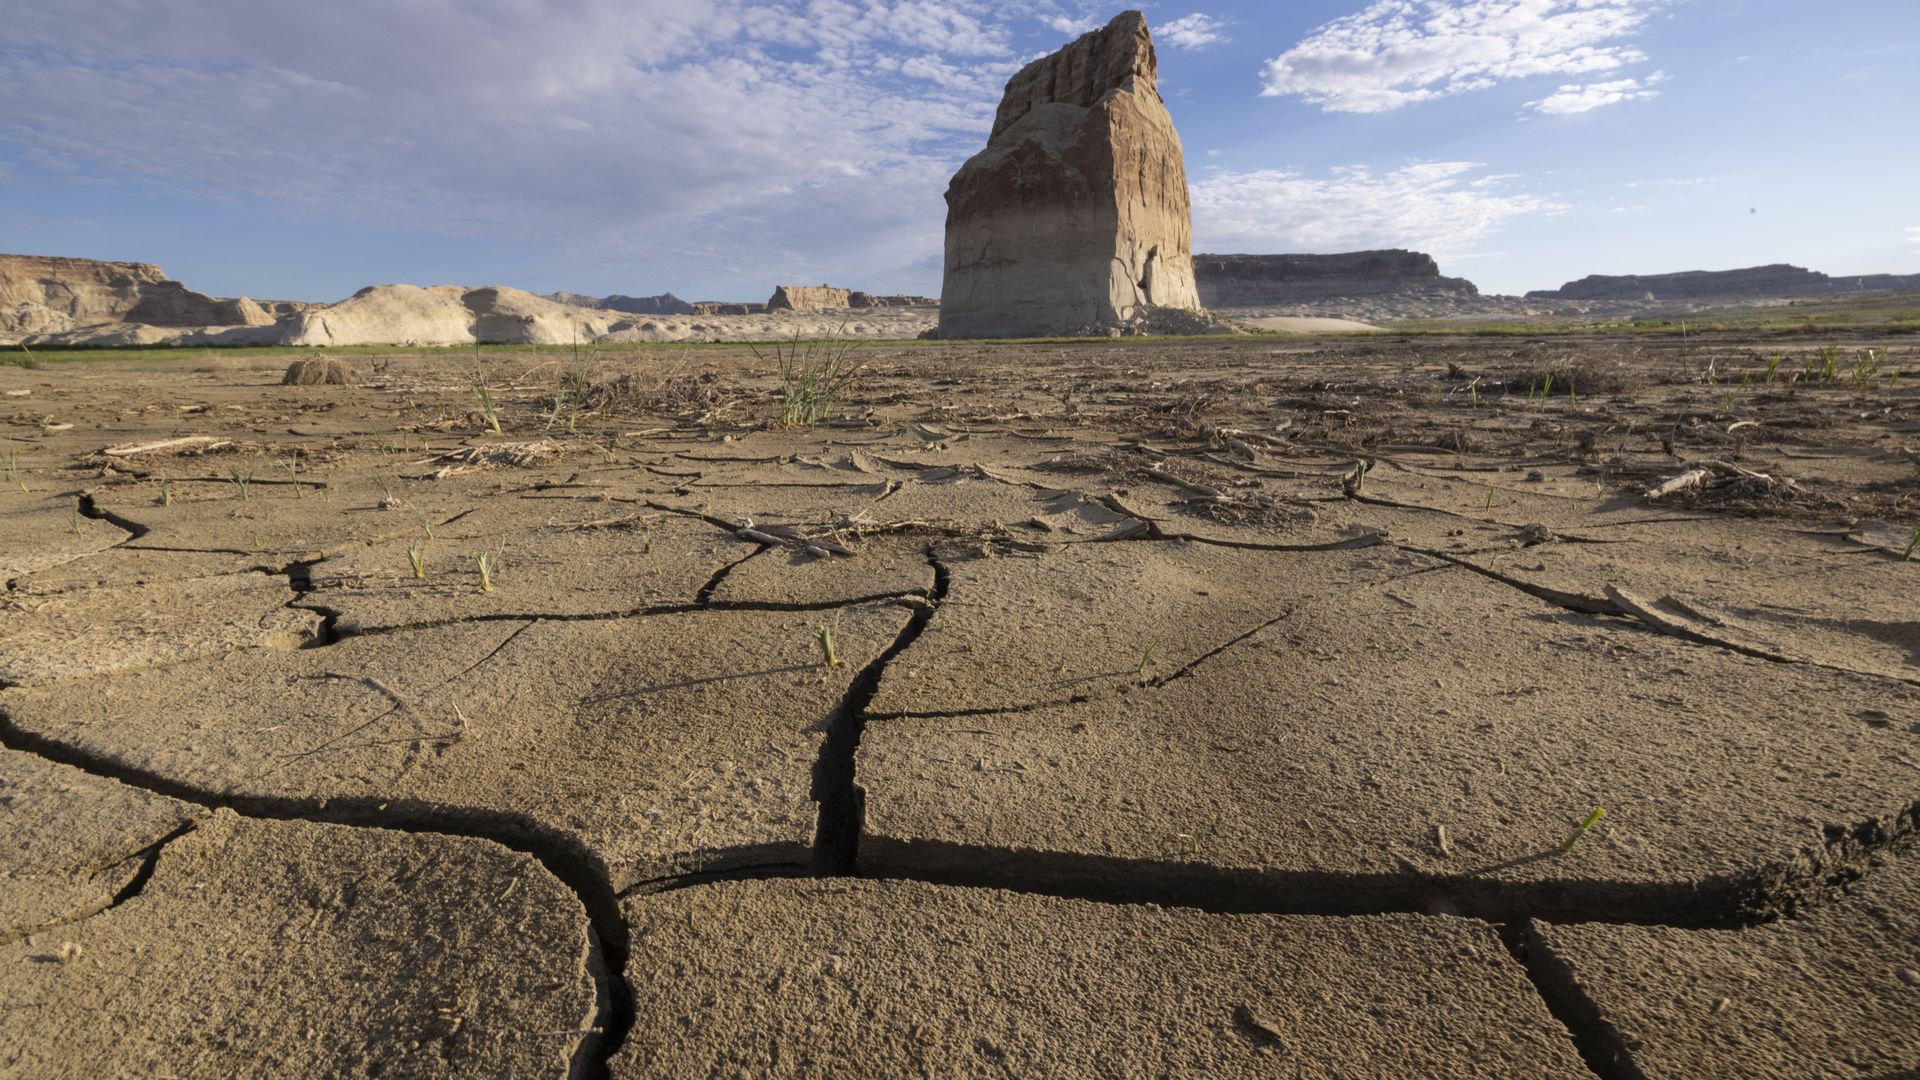  Cracked mud dries in the sun where Lake Powell used to surround Lone Rock, in the distance, on September 2, 2022 near Page, Arizona. 